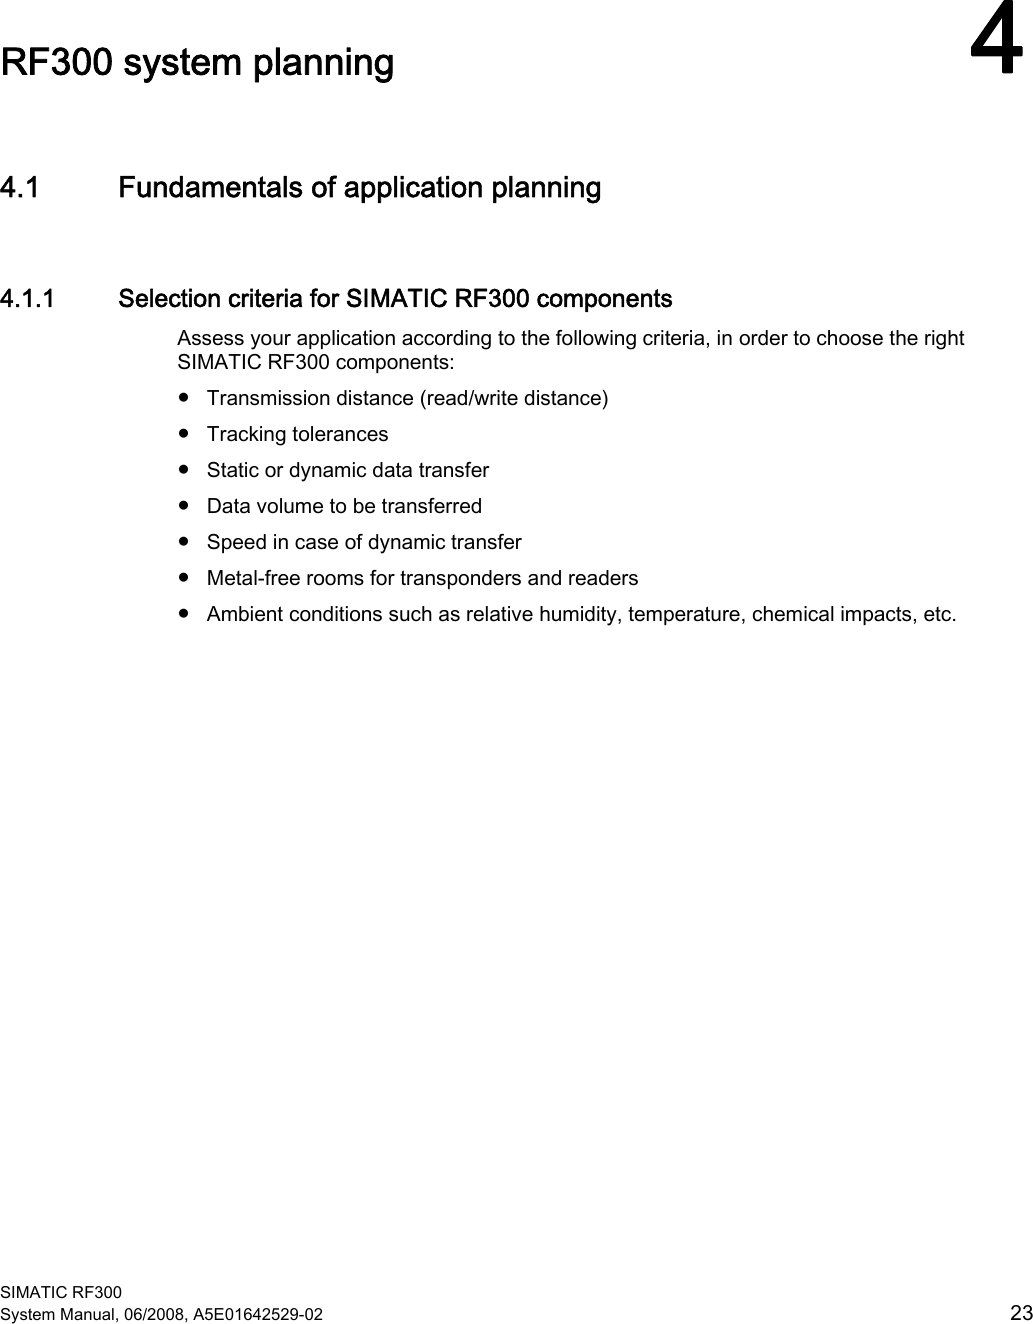  SIMATIC RF300 System Manual, 06/2008, A5E01642529-02  23 RF300 system planning 44.1 Fundamentals of application planning 4.1.1 Selection criteria for SIMATIC RF300 components Assess your application according to the following criteria, in order to choose the right SIMATIC RF300 components:  ● Transmission distance (read/write distance) ● Tracking tolerances ● Static or dynamic data transfer ● Data volume to be transferred ● Speed in case of dynamic transfer ● Metal-free rooms for transponders and readers ● Ambient conditions such as relative humidity, temperature, chemical impacts, etc. 